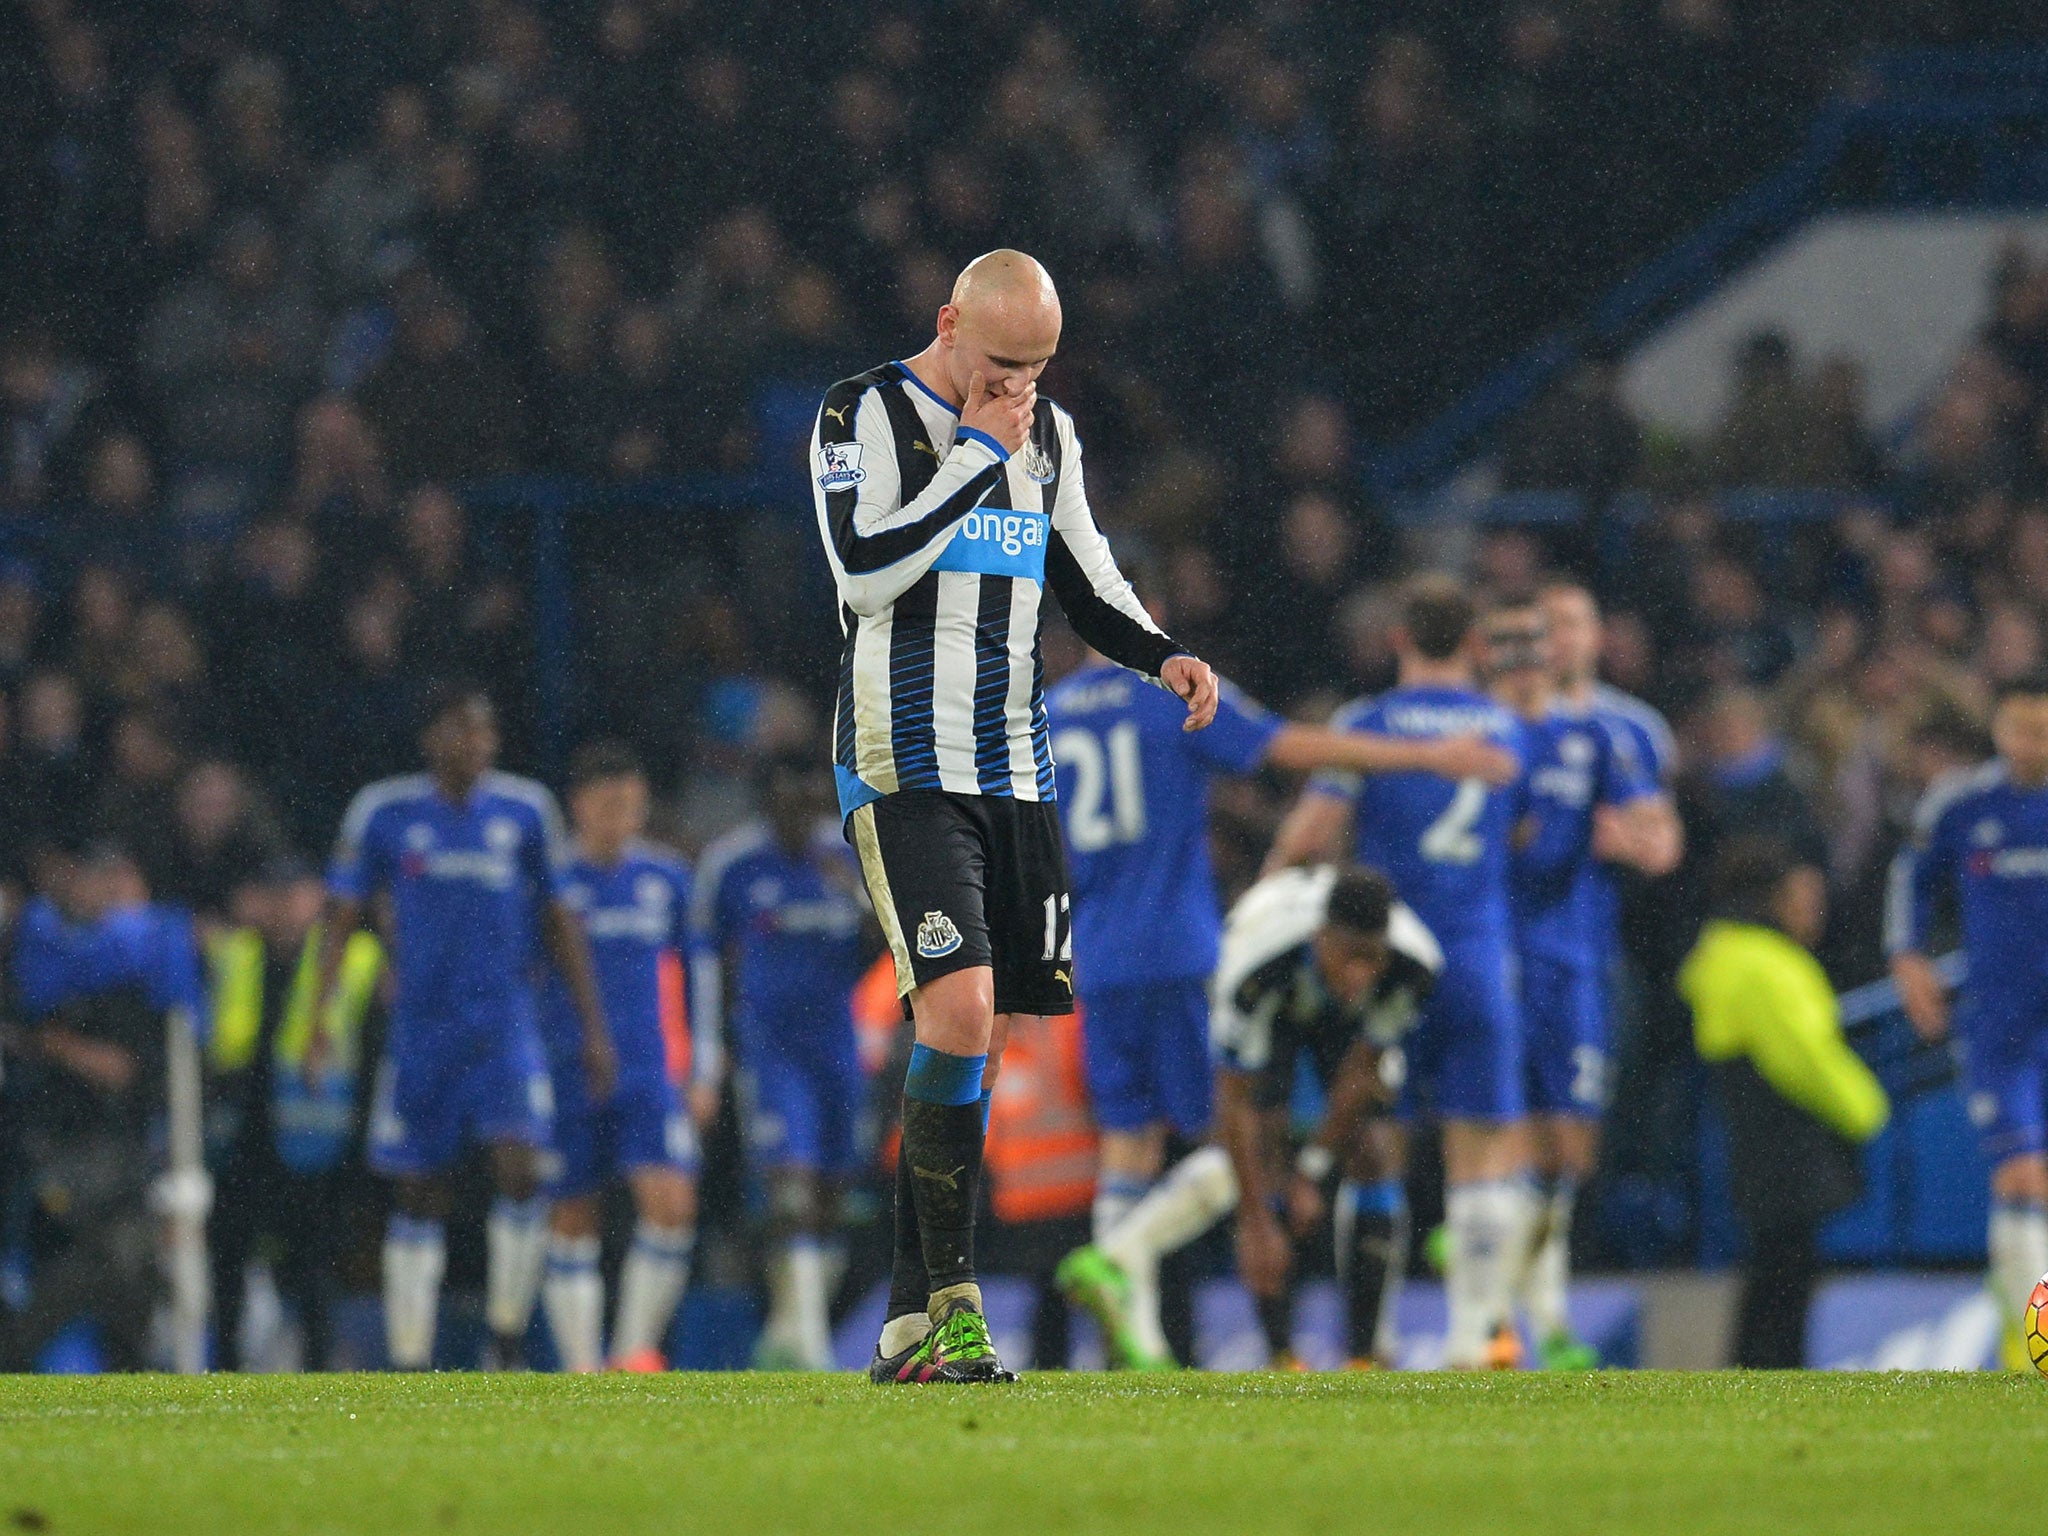 Jonjo Shelvey has not impressed since his move to Newcastle